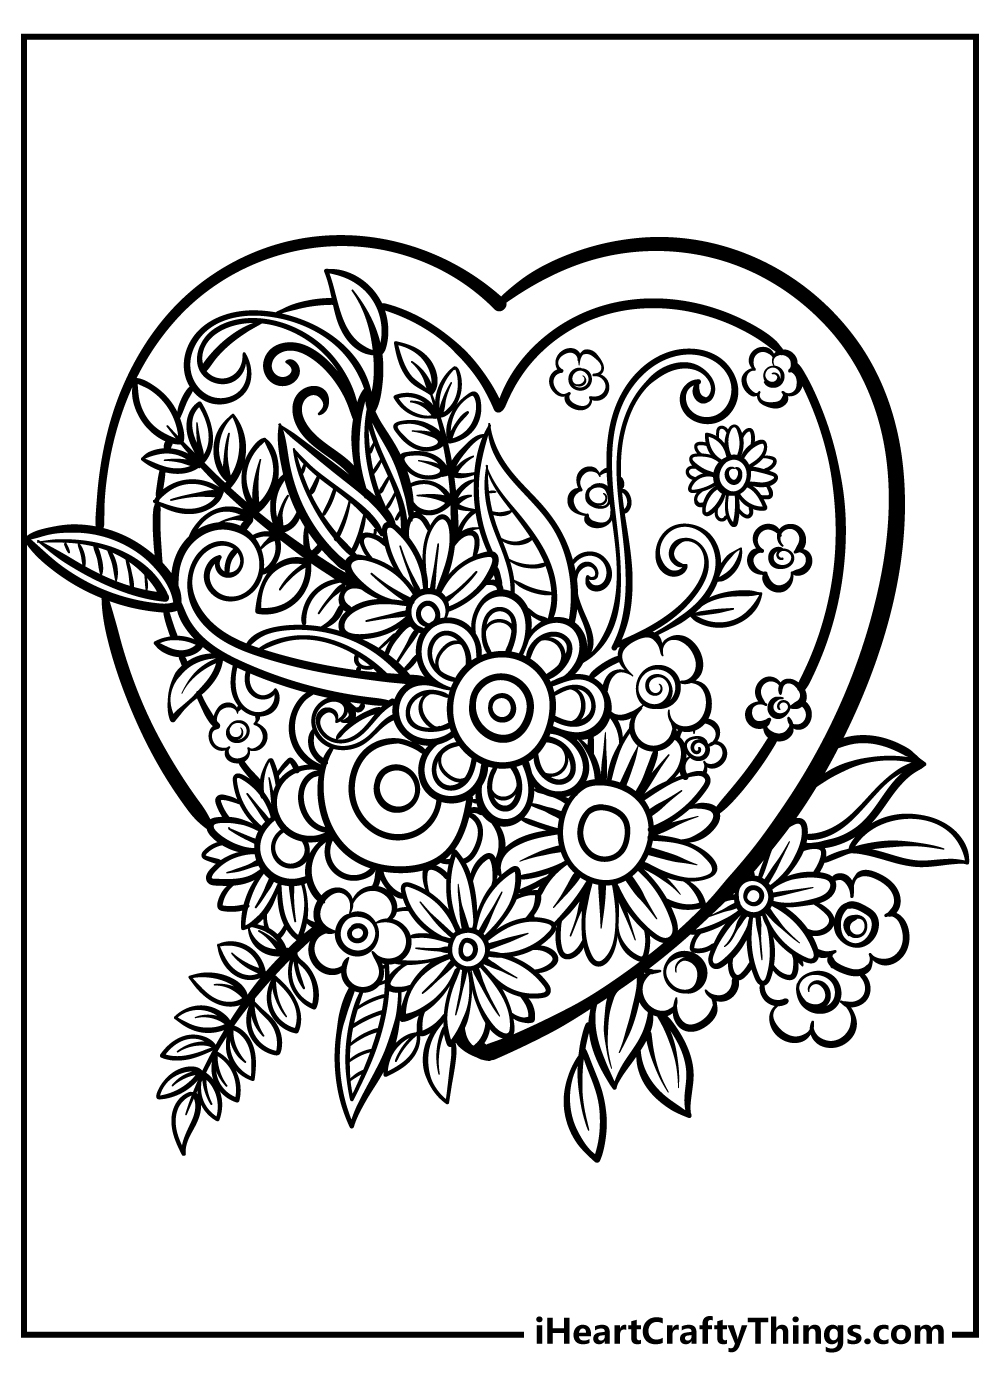 Free Printable Adult Coloring Pages 